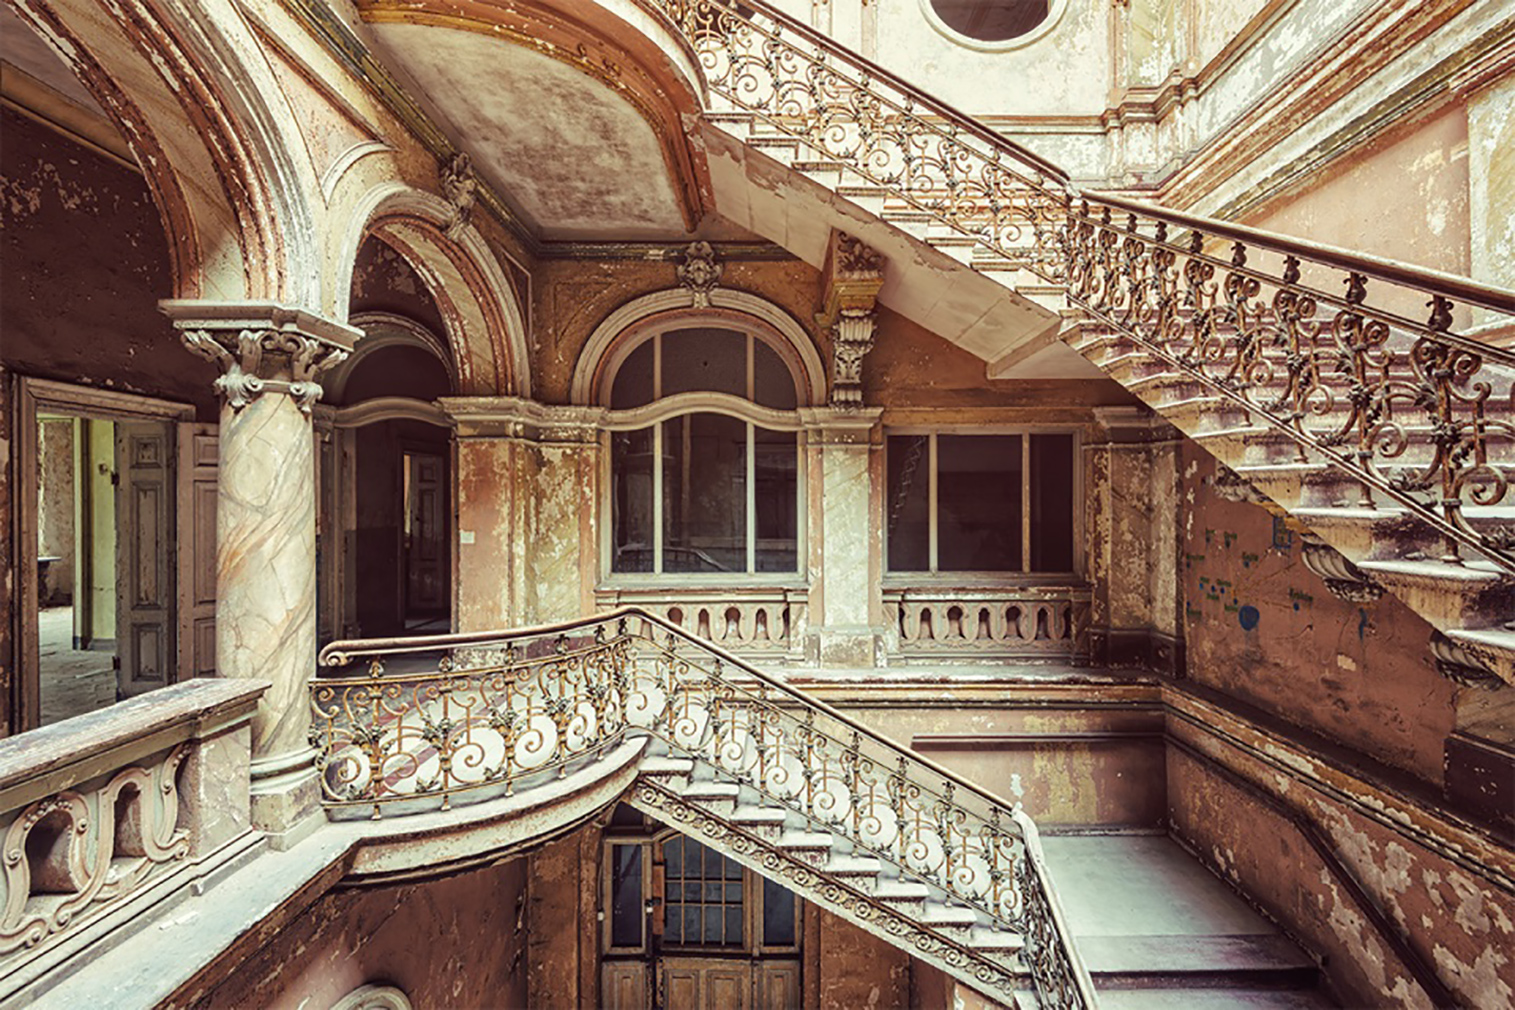 Gina Soden photographs Europe's decaying buildings